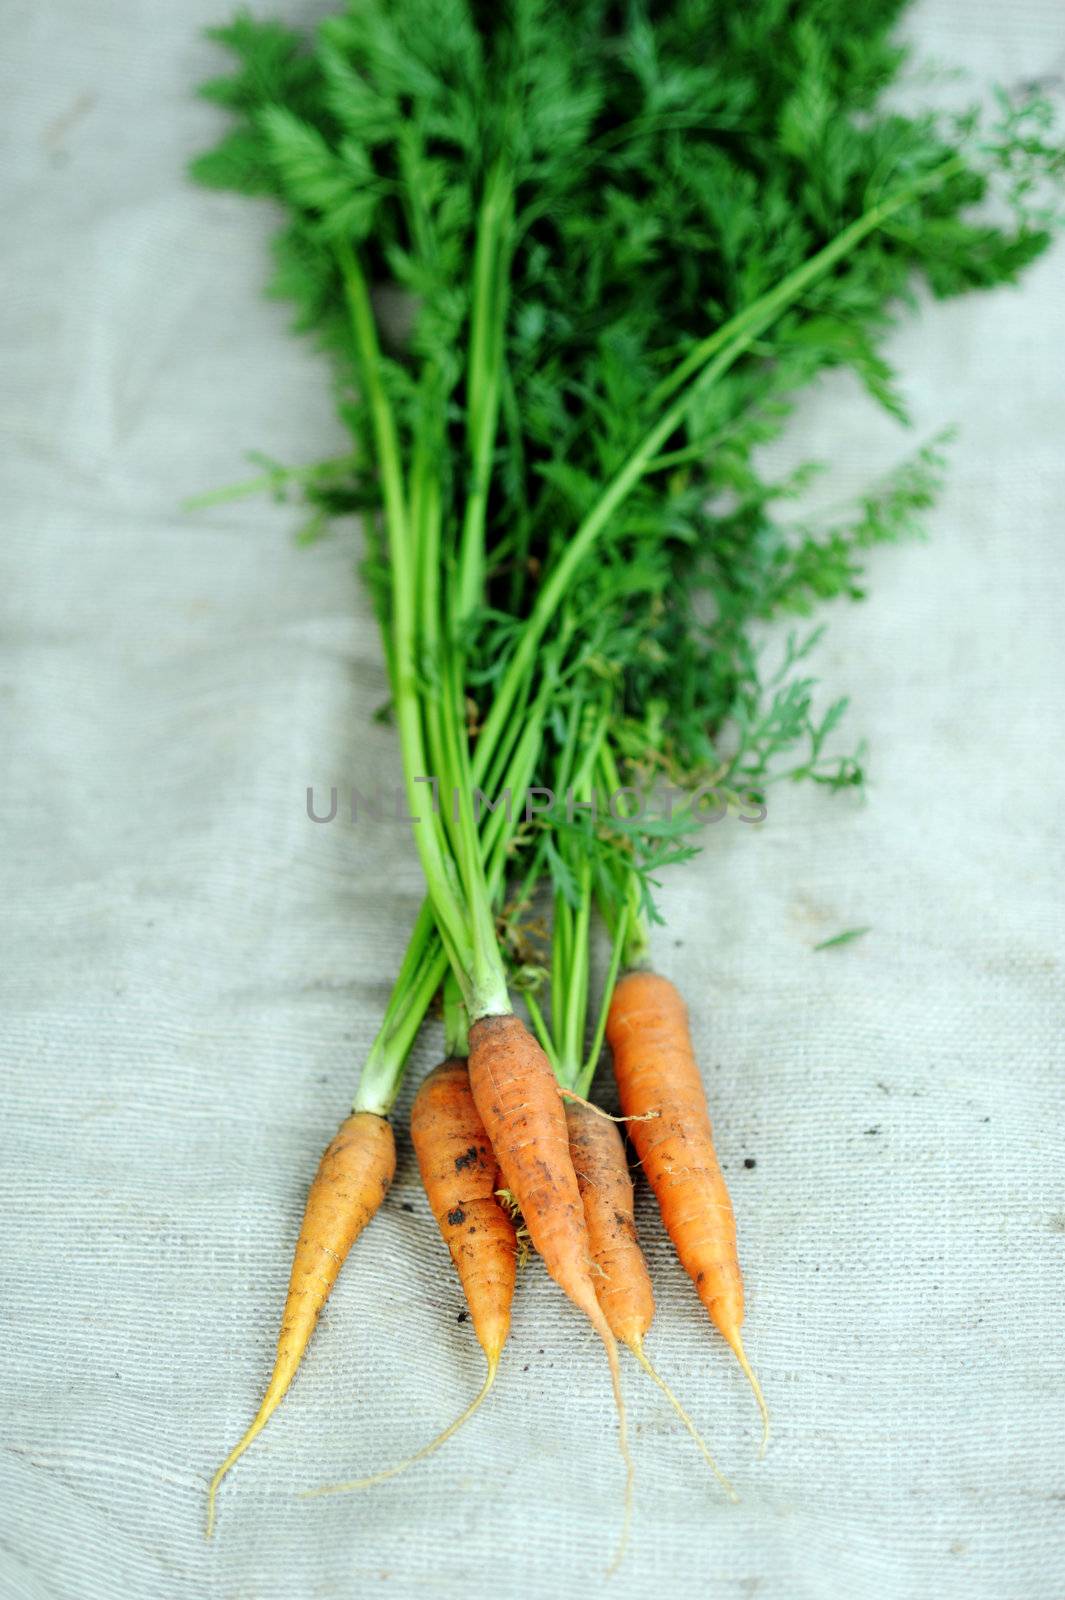 An image of a group of fresh orange carrots